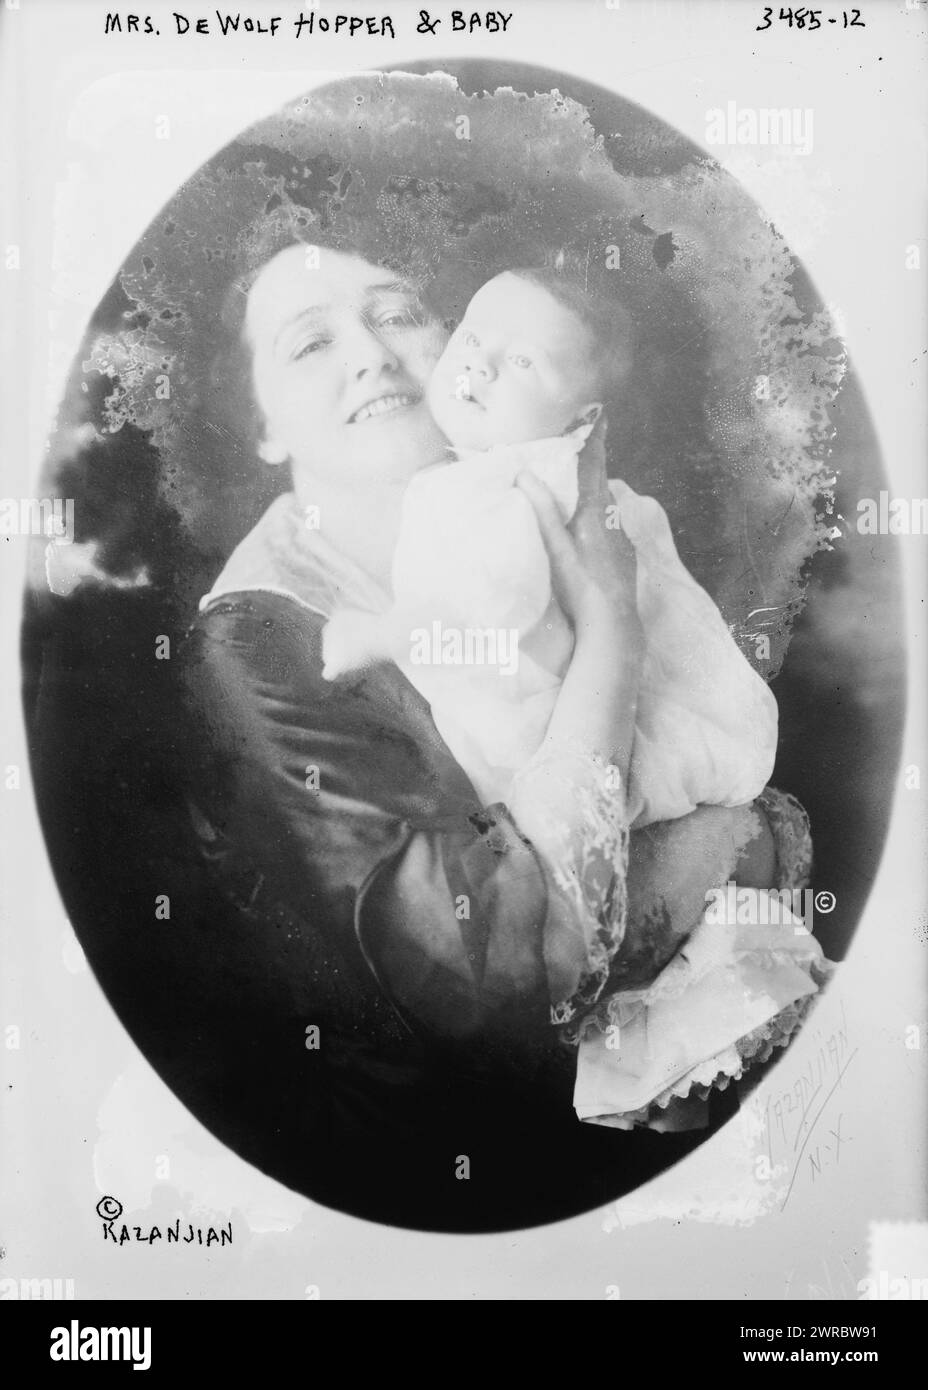 Mrs. De Wolf Hopper and baby, Photograph shows gossip columnist and actress Hedda Hopper (1885-1966) with her son William Hopper (1915-1970)., 1915, Glass negatives, 1 negative: glass Stock Photo